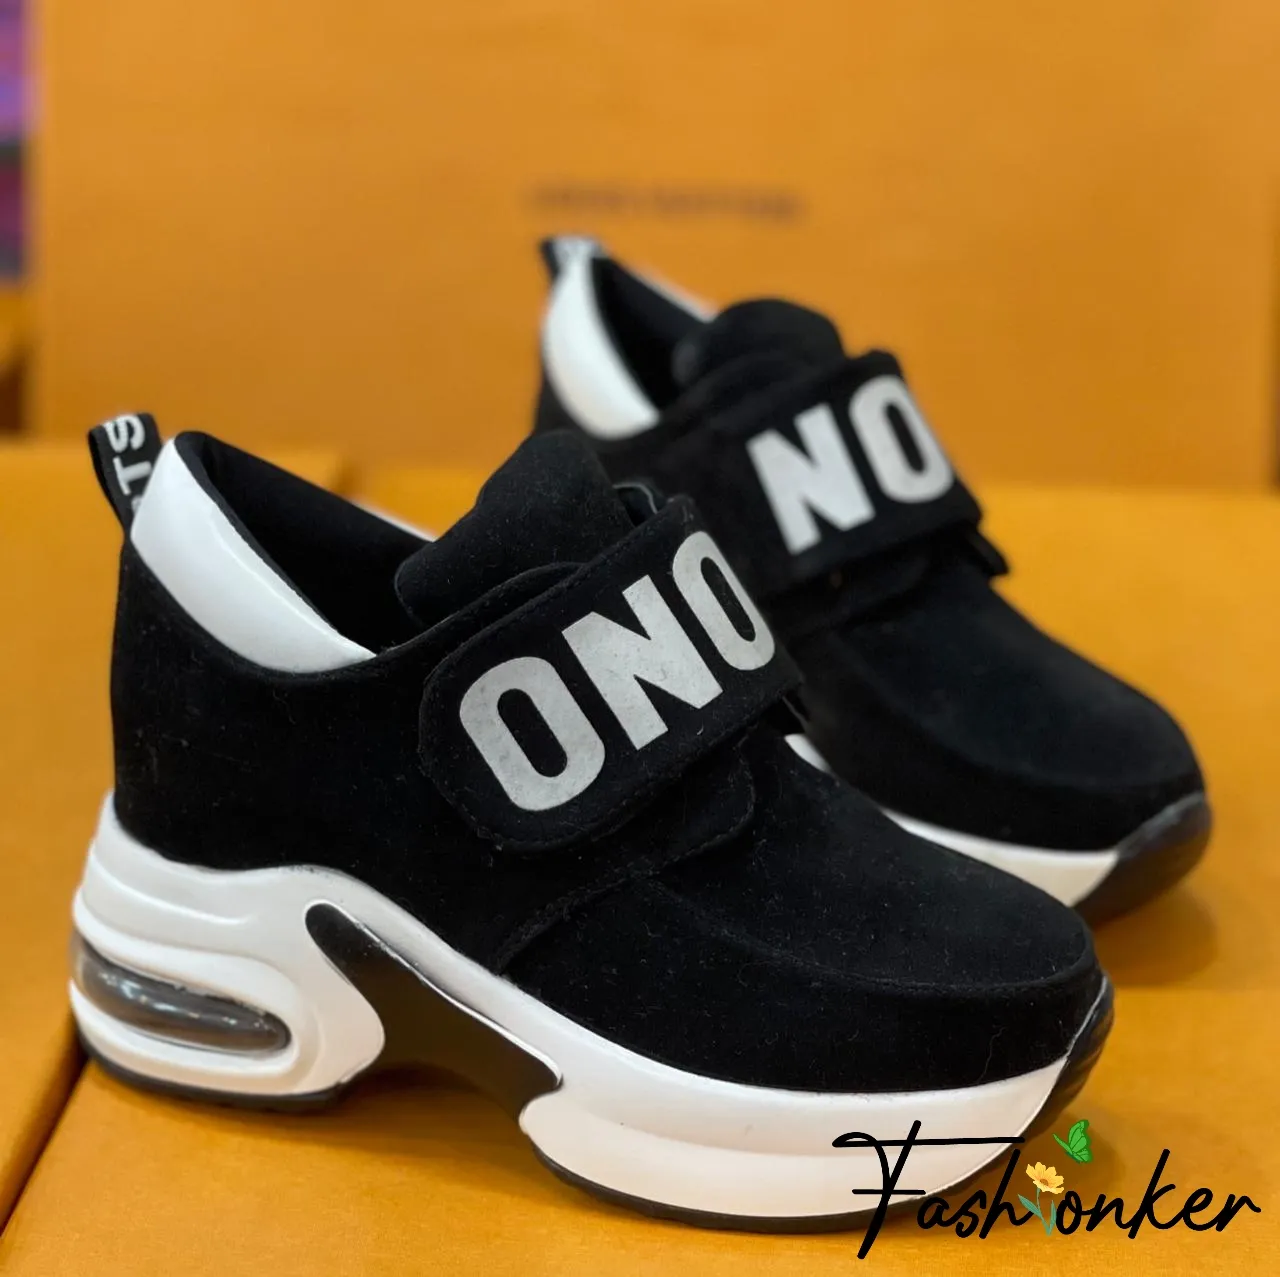 Best Price ONON Black Highshoes